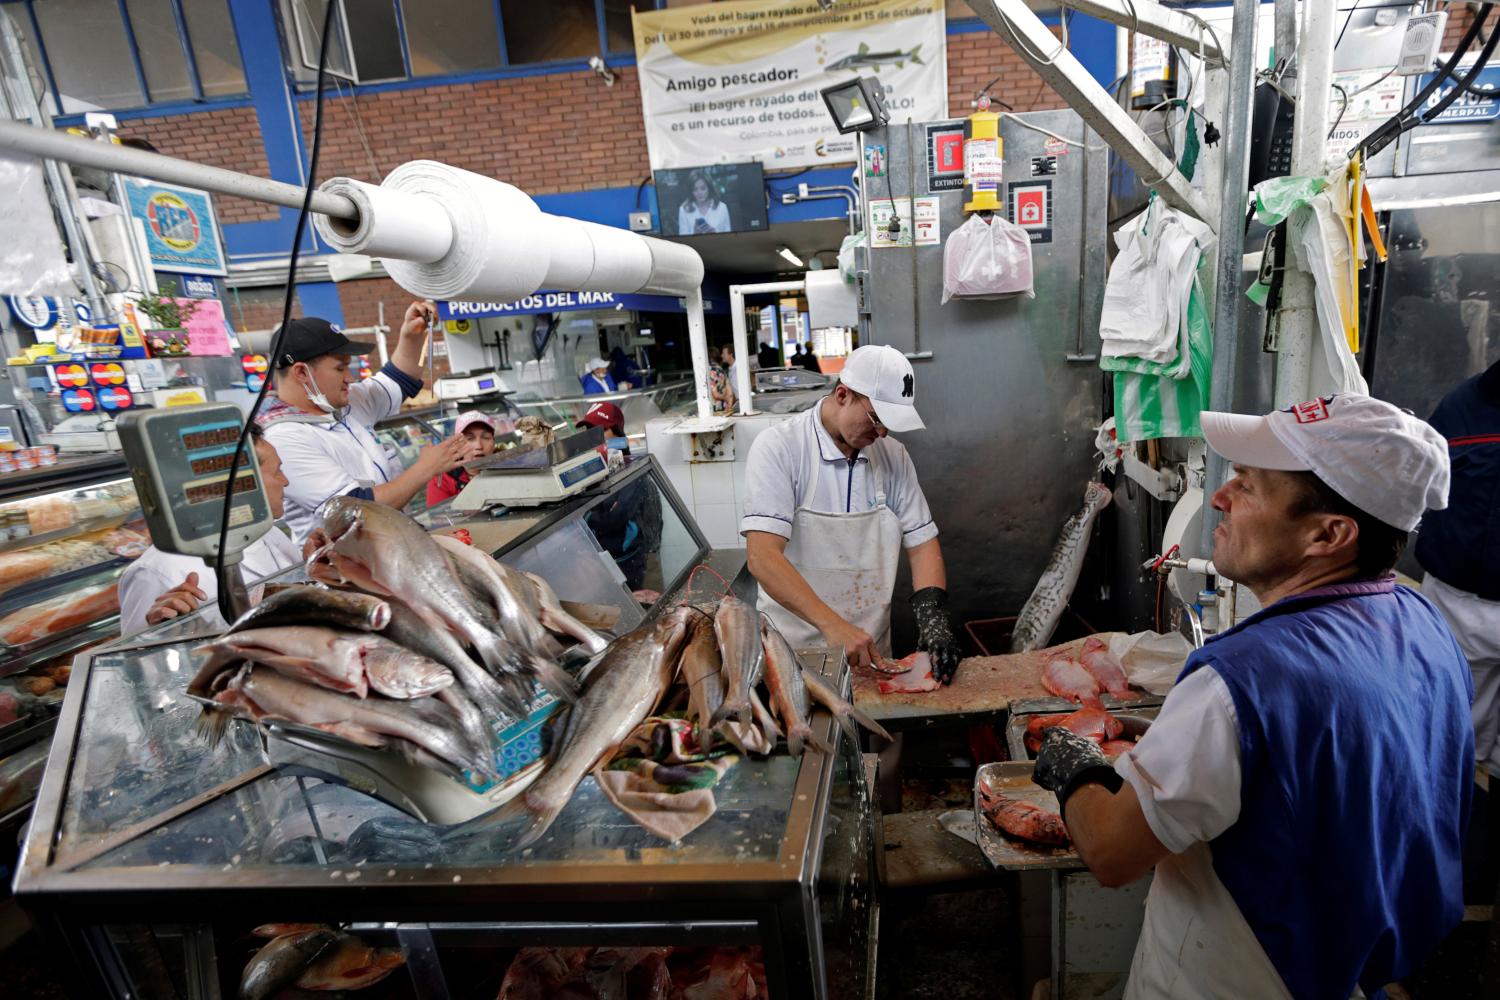 Workers clean some fish in the Paloquemao market square in Bogota, Colombia October 30, 2018. Picture taken October 30, 2018. REUTERS/Luisa Gonzalez - RC157F8BB830